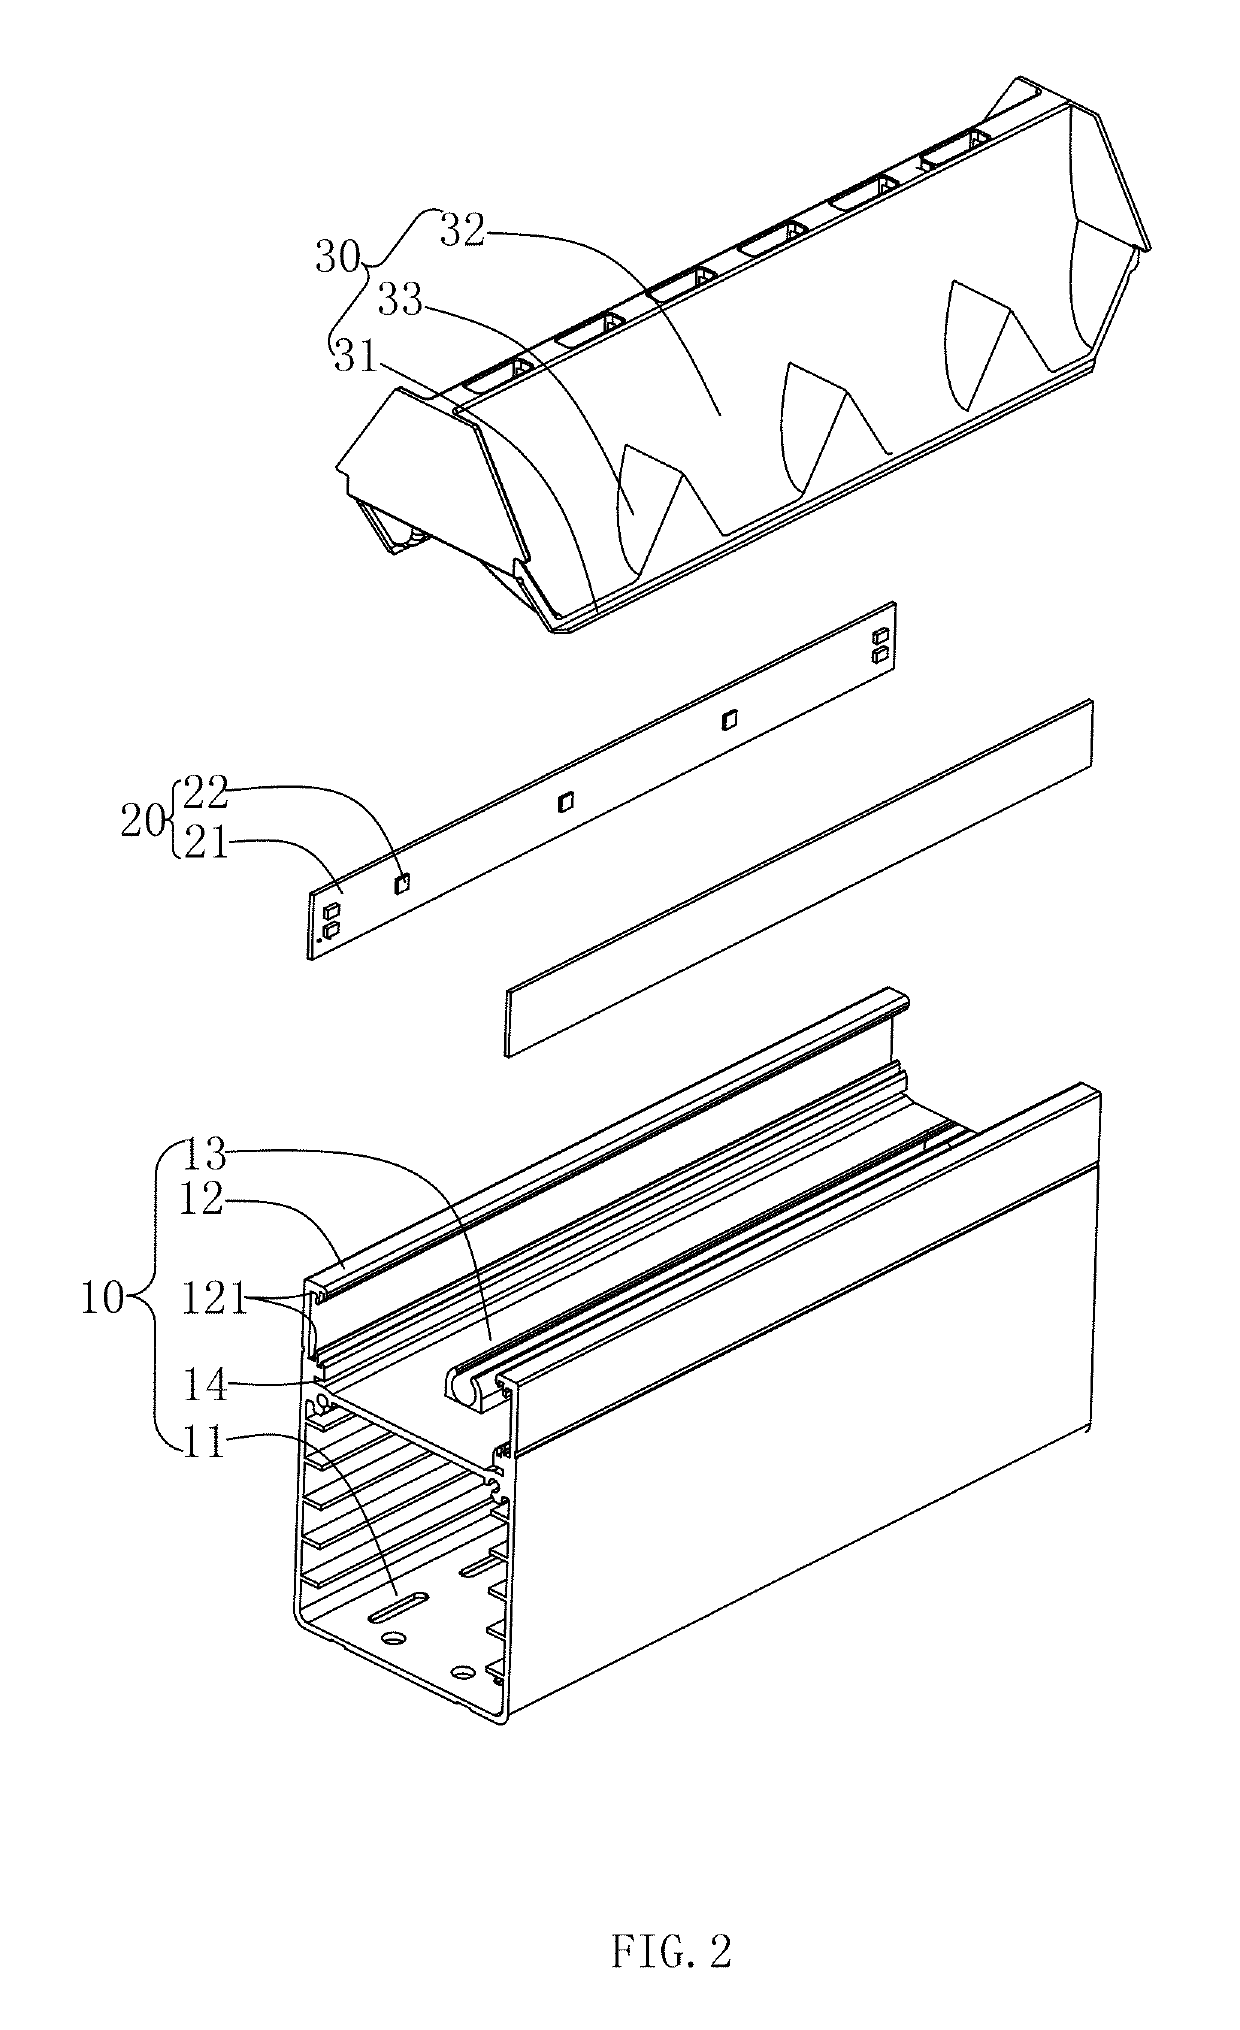 LED strip lamp light distributing system having a light source module and a reflective device with various curvatures for illuminating different sections of an illuminated surface